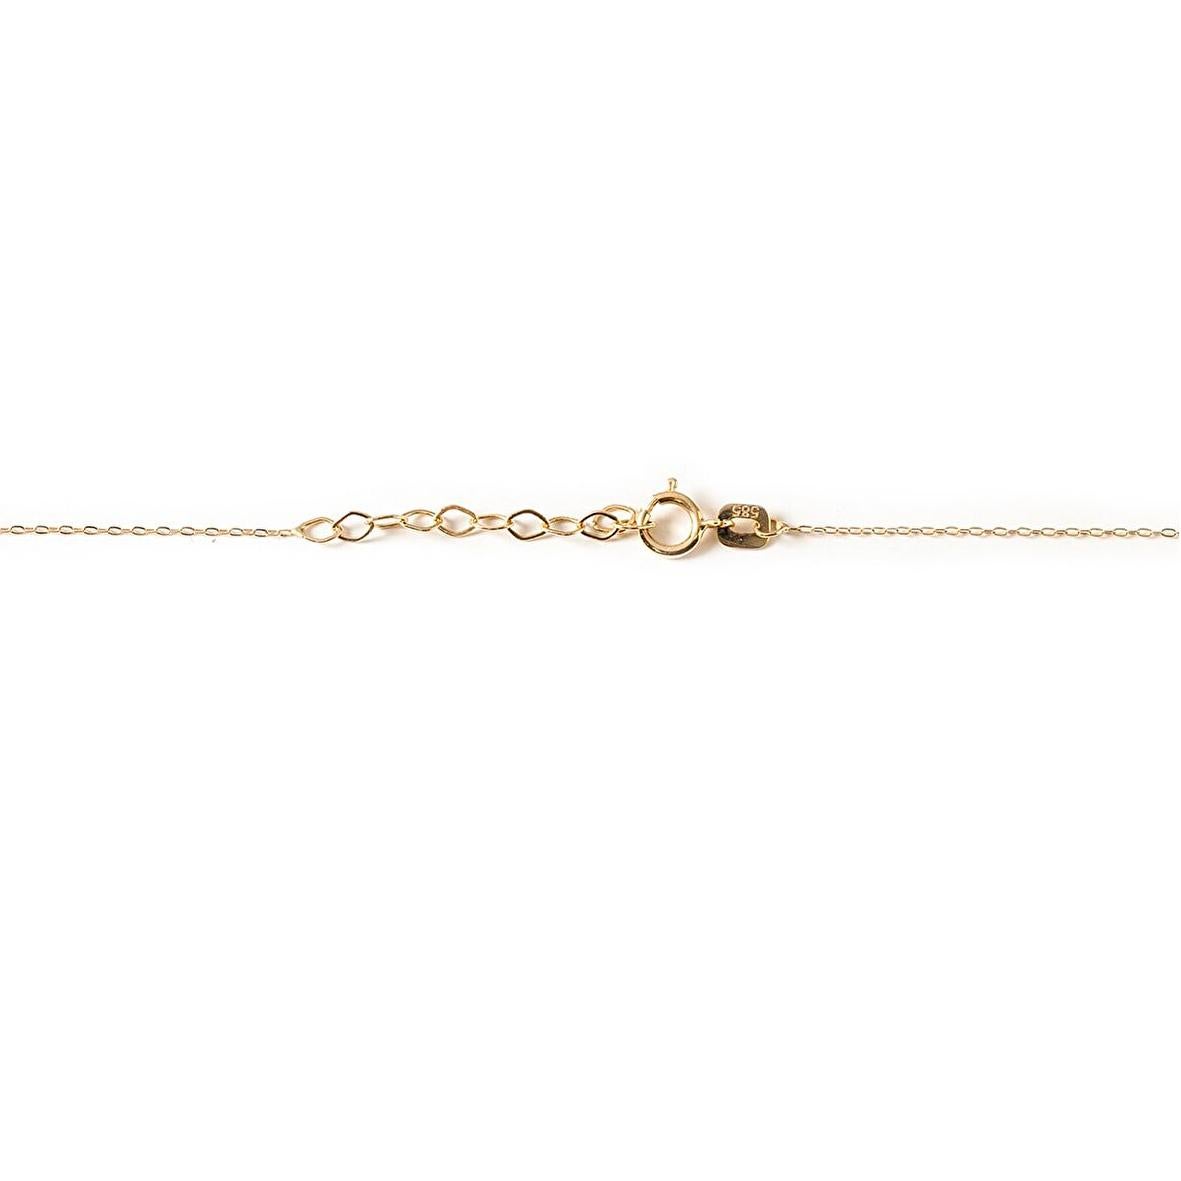 14 ct gold cross necklace